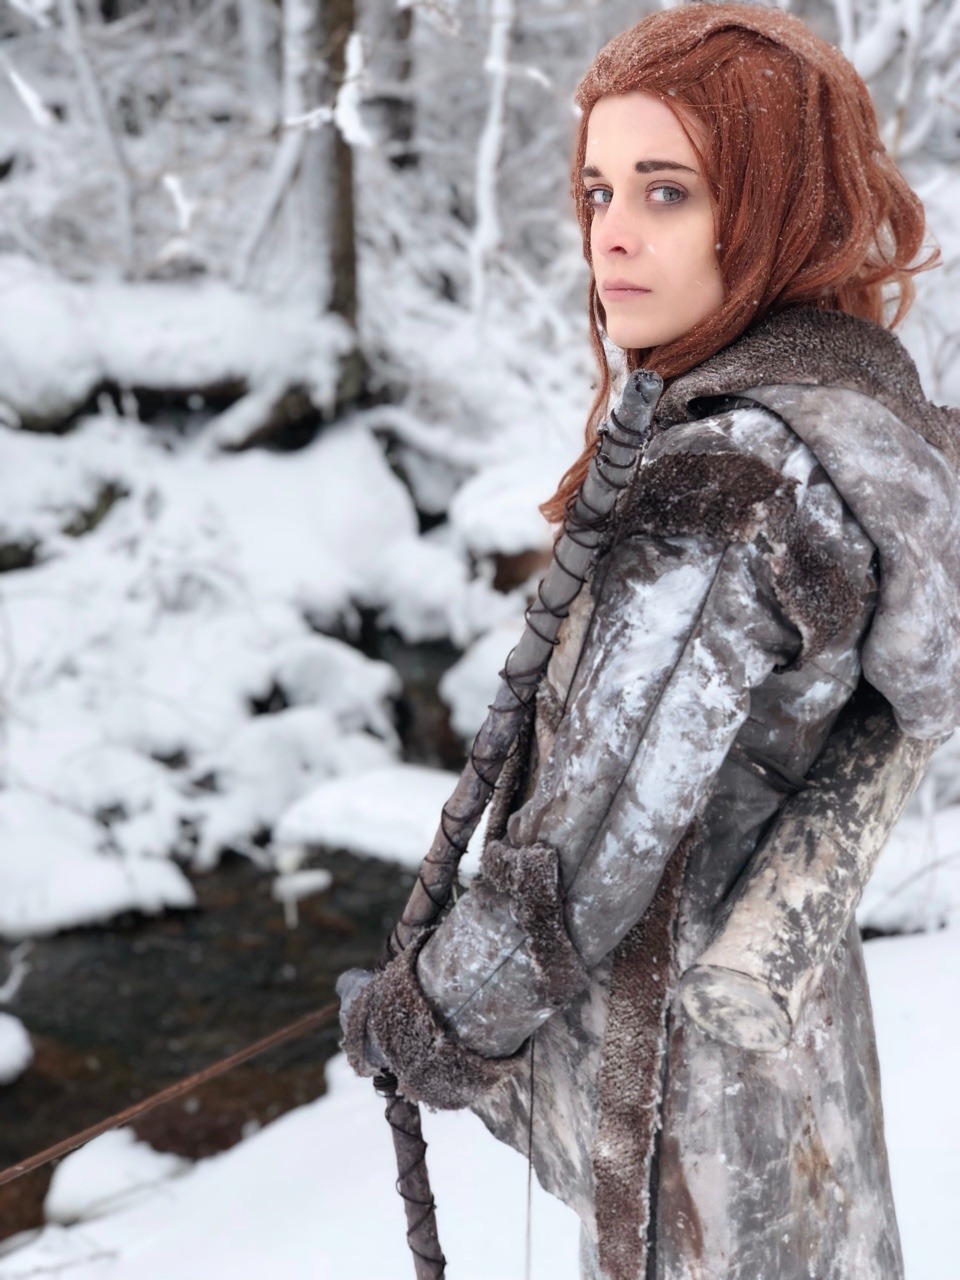 Ygritte the Wildling Game of Thrones Cosplay  Queen s Landing